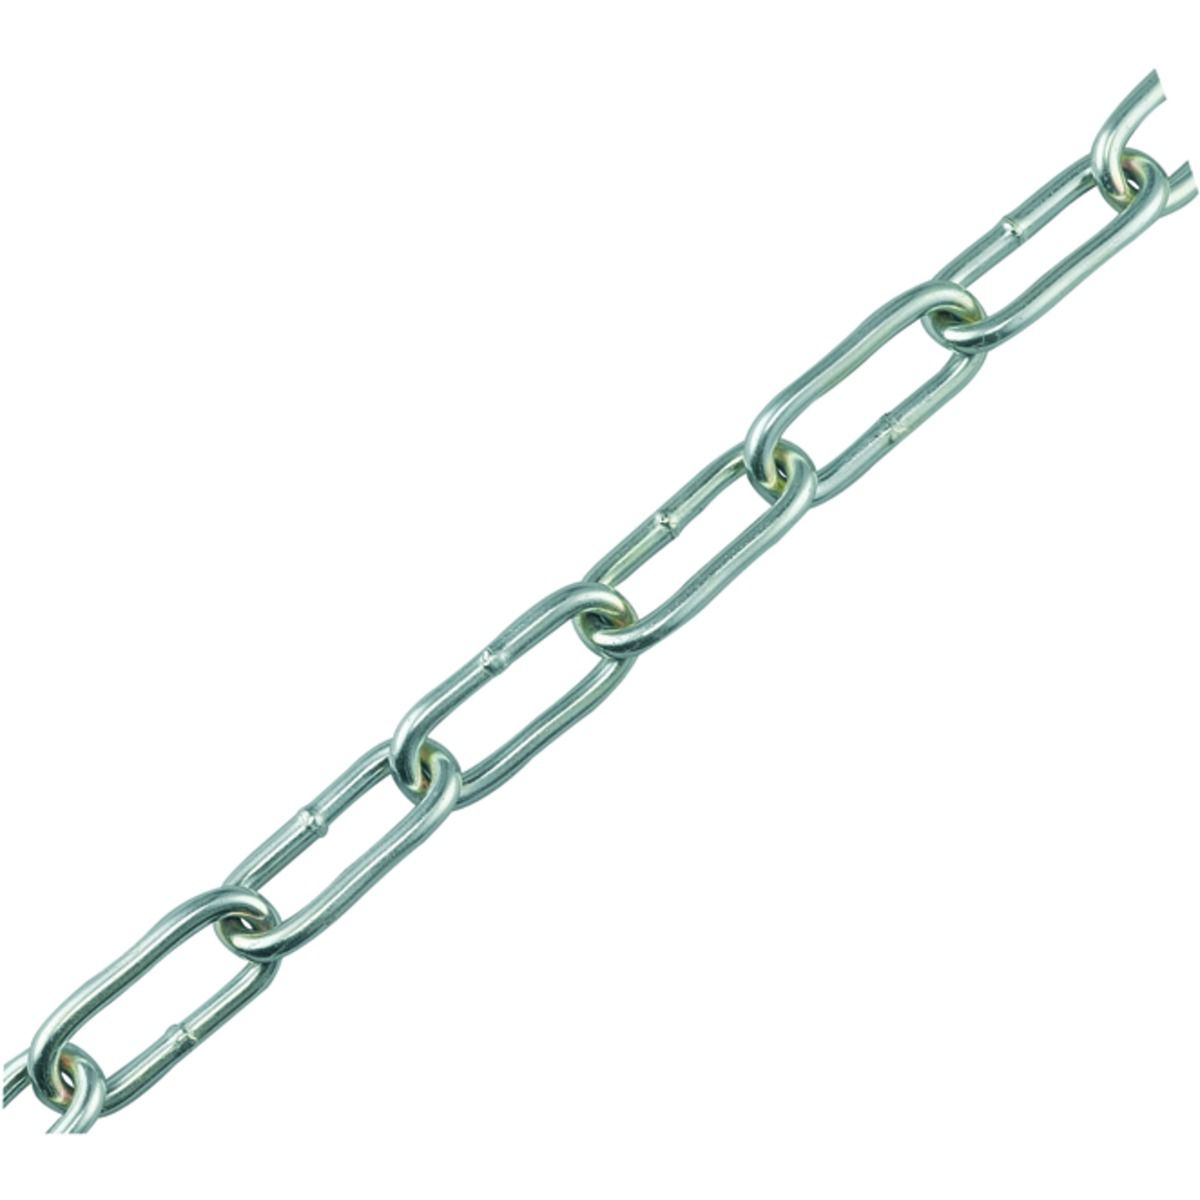 Image of Wickes Zinc Plated Steel Welded Chain - 5 x 35mm x 2m